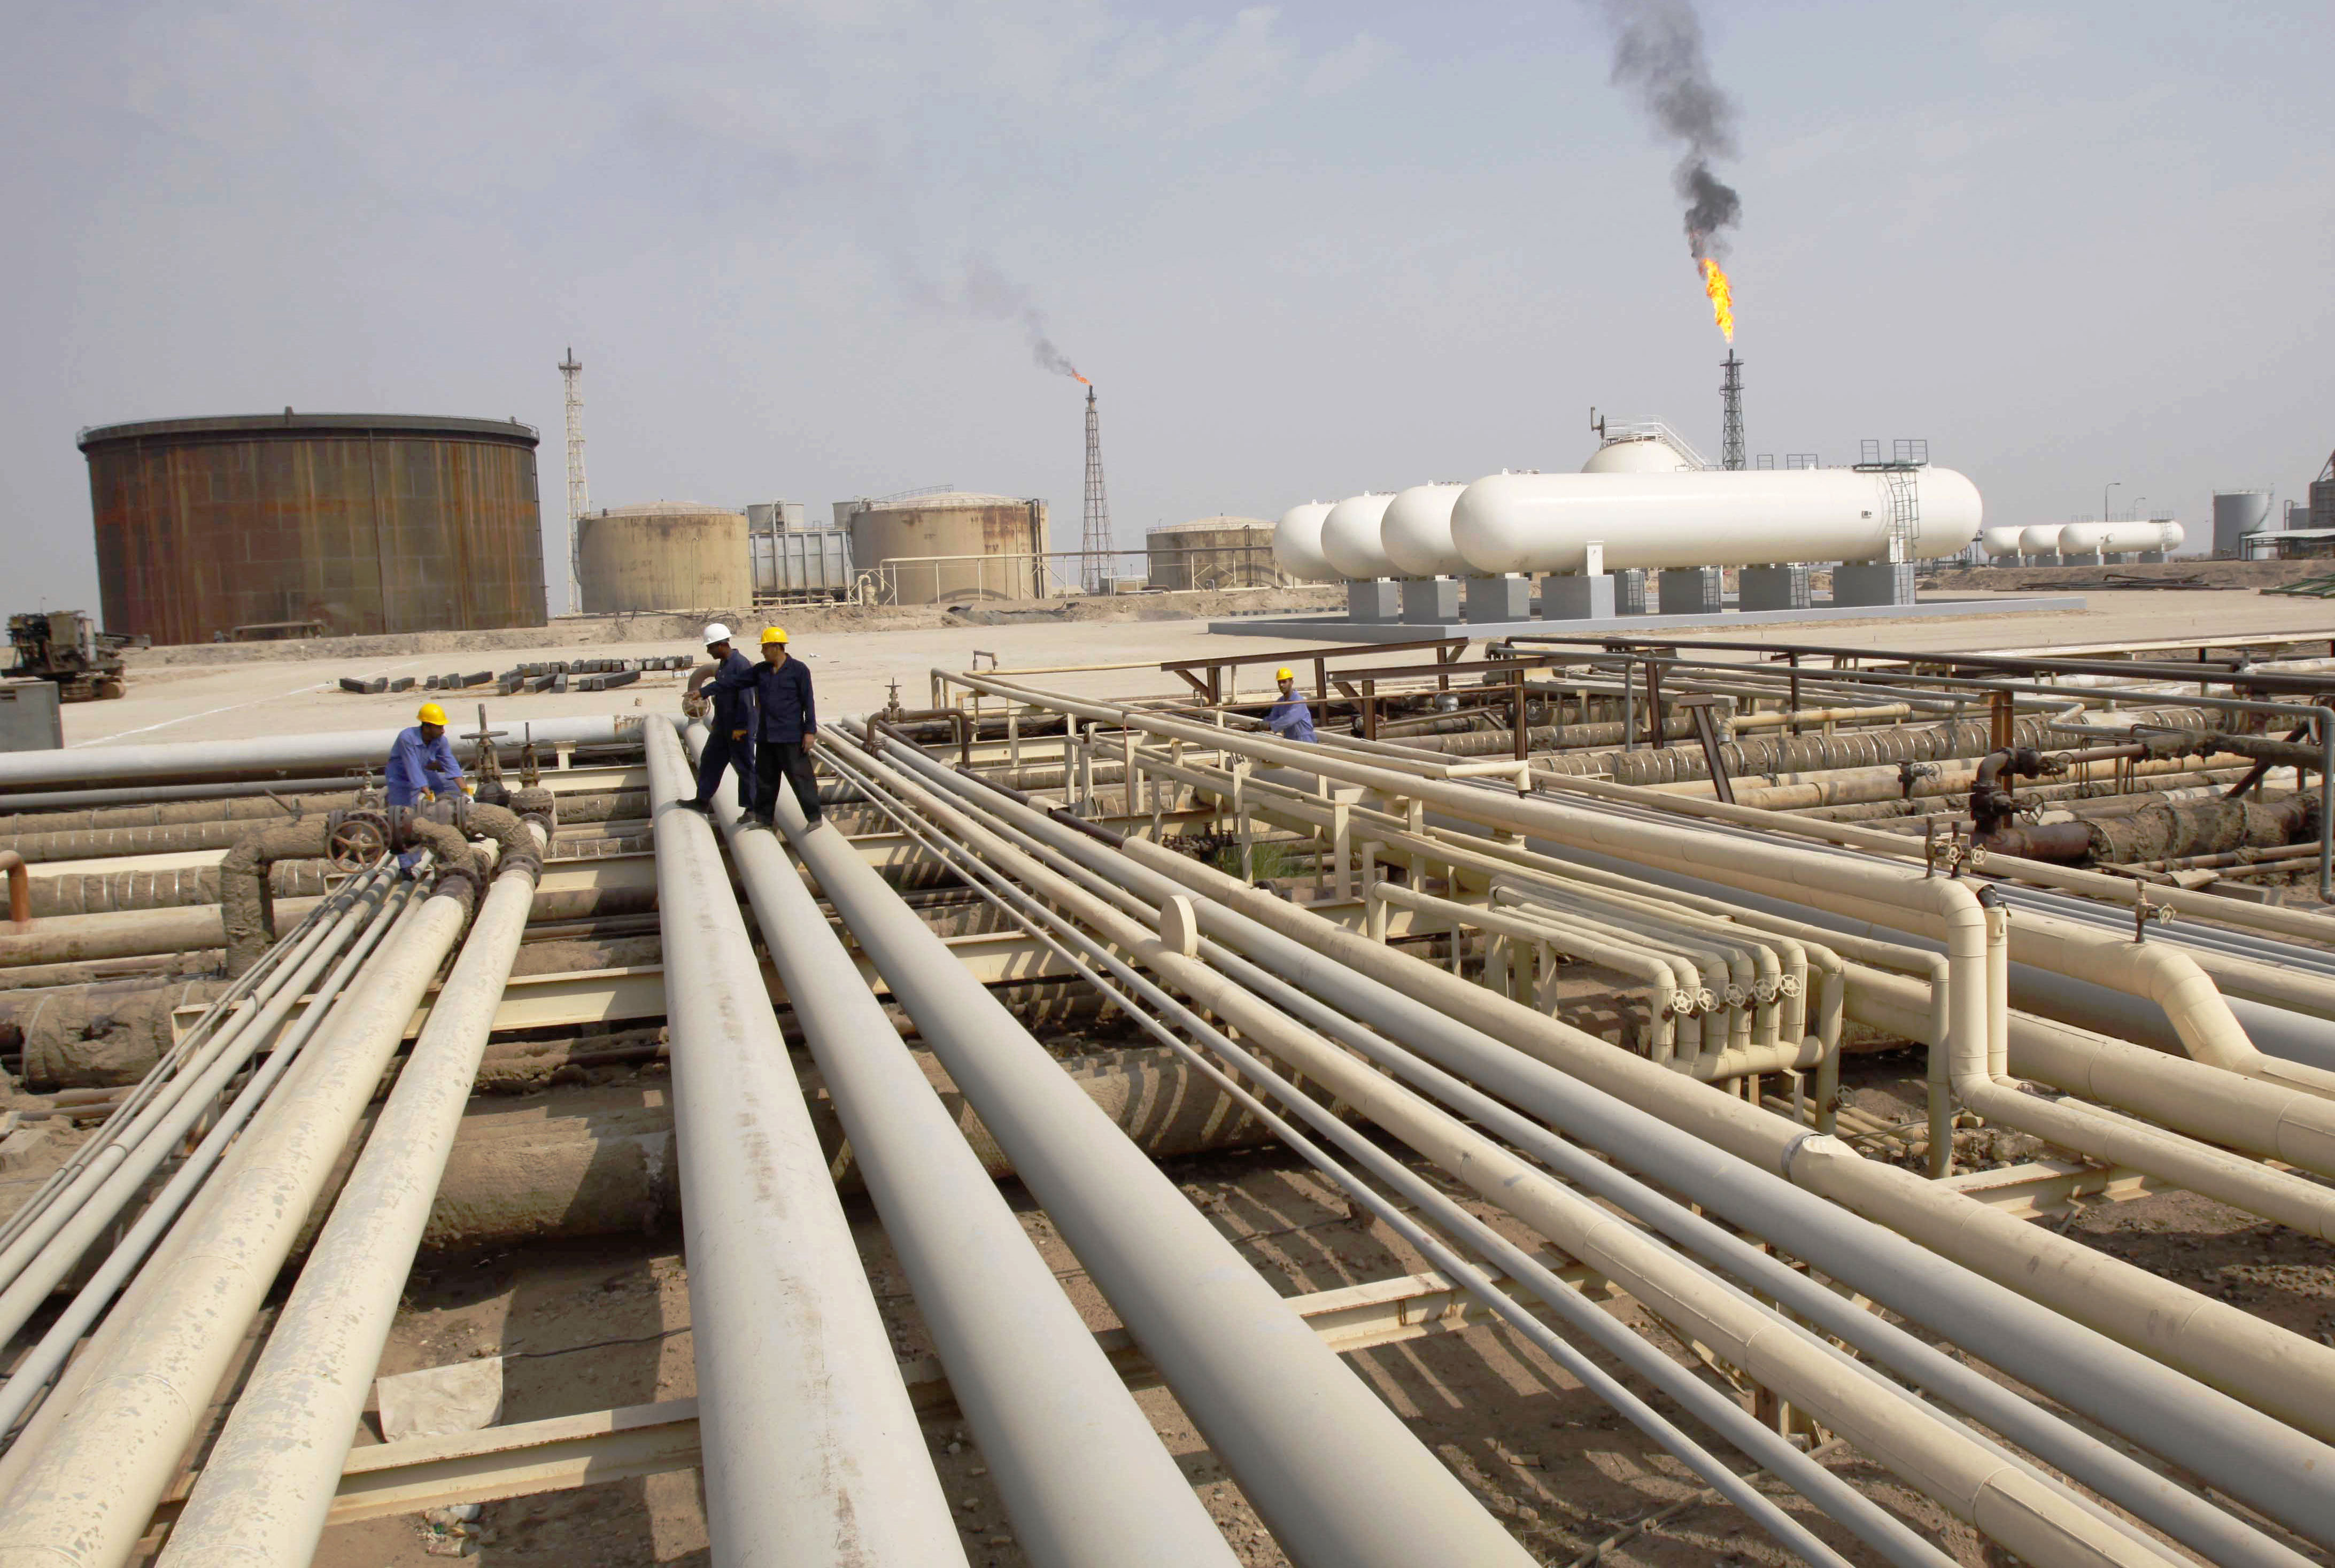 Iraqi workers walk on pipelines of an oil refinery near the city of Basra in 2009. In November of that year, Iraq awarded&nbsp;the right to develop the West Qurna-1 field to a consortium led by Exxon and Shell.